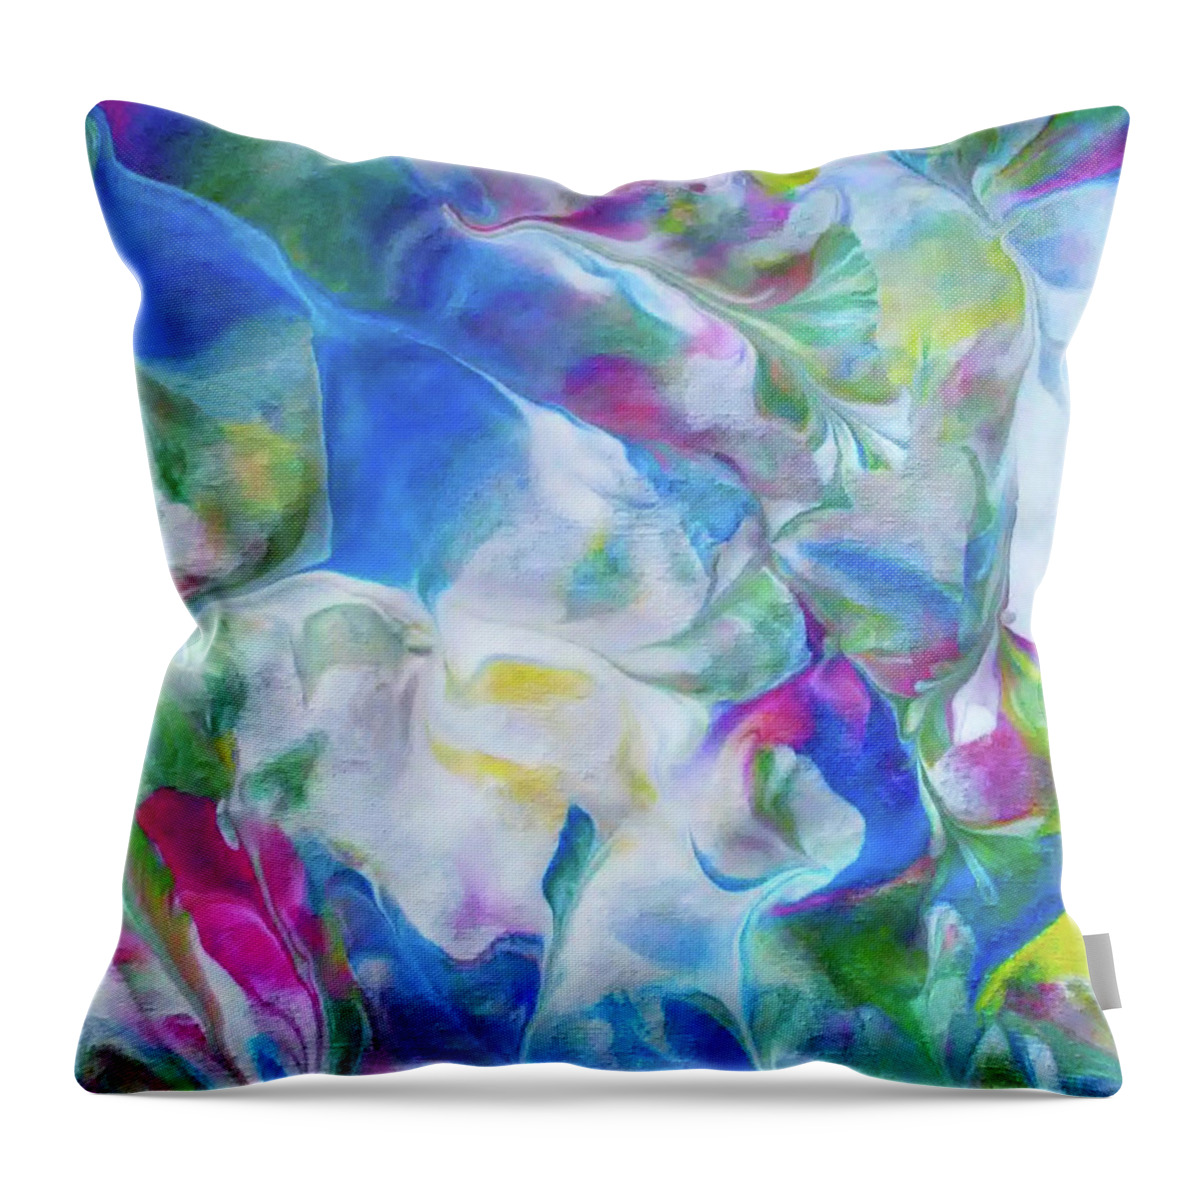 Abstract Flora Blues Greens Pink Yellow Throw Pillow featuring the painting Blue Bloom by Deborah Erlandson